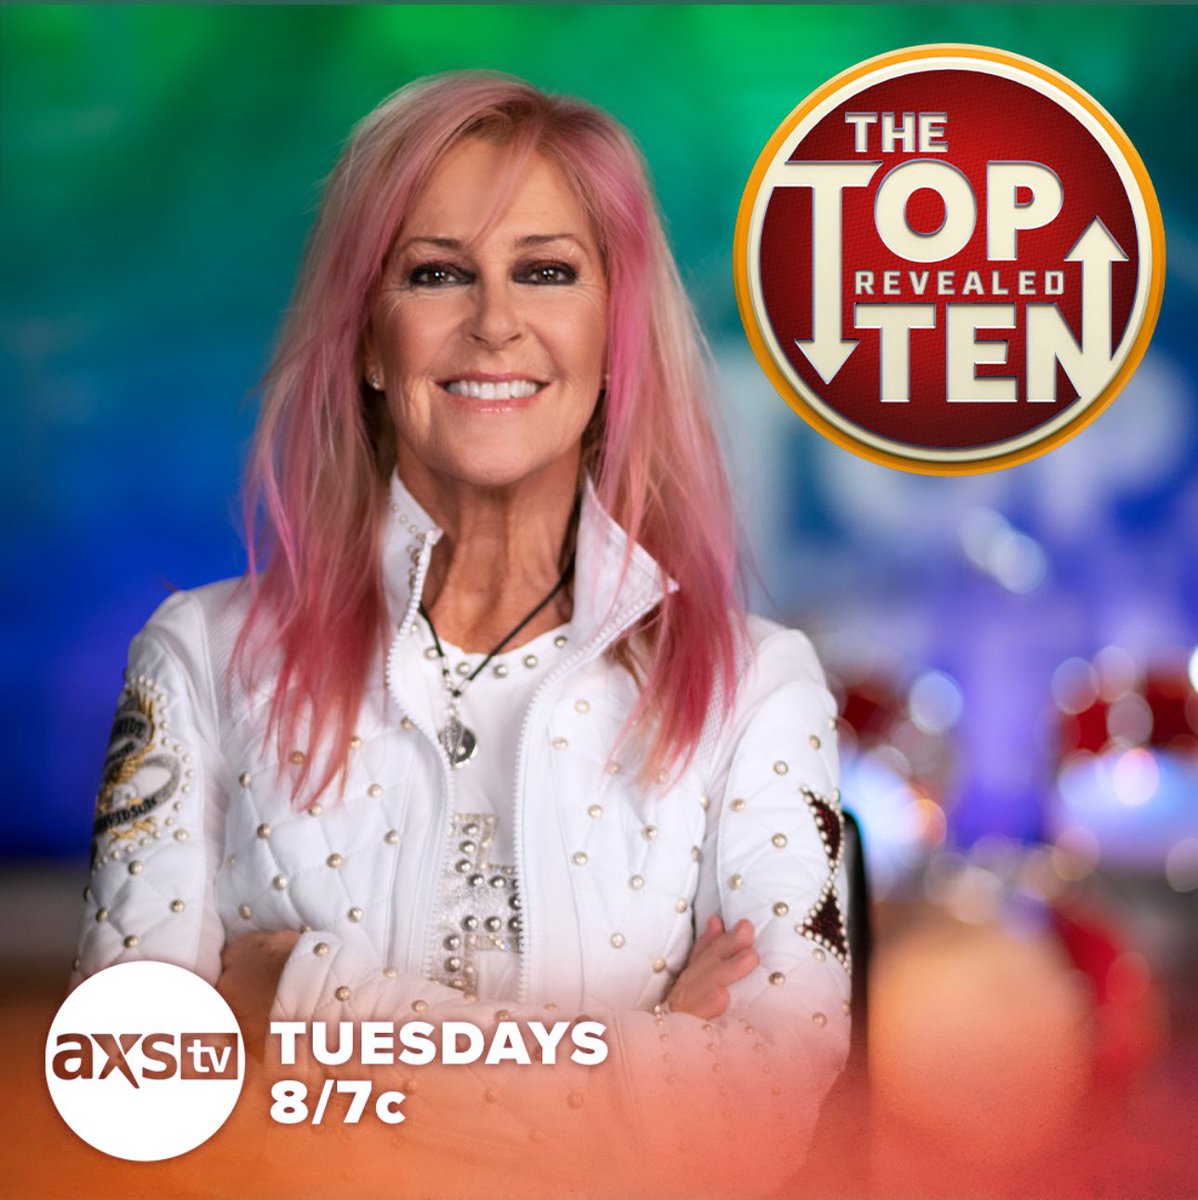 Tune in on TUESDAY to watch THE TOP TEN REVEALED on @AXSTV with ME and @KatieDaryl as we count down KNIGHTED MUSICIANS at 8et/5pt.